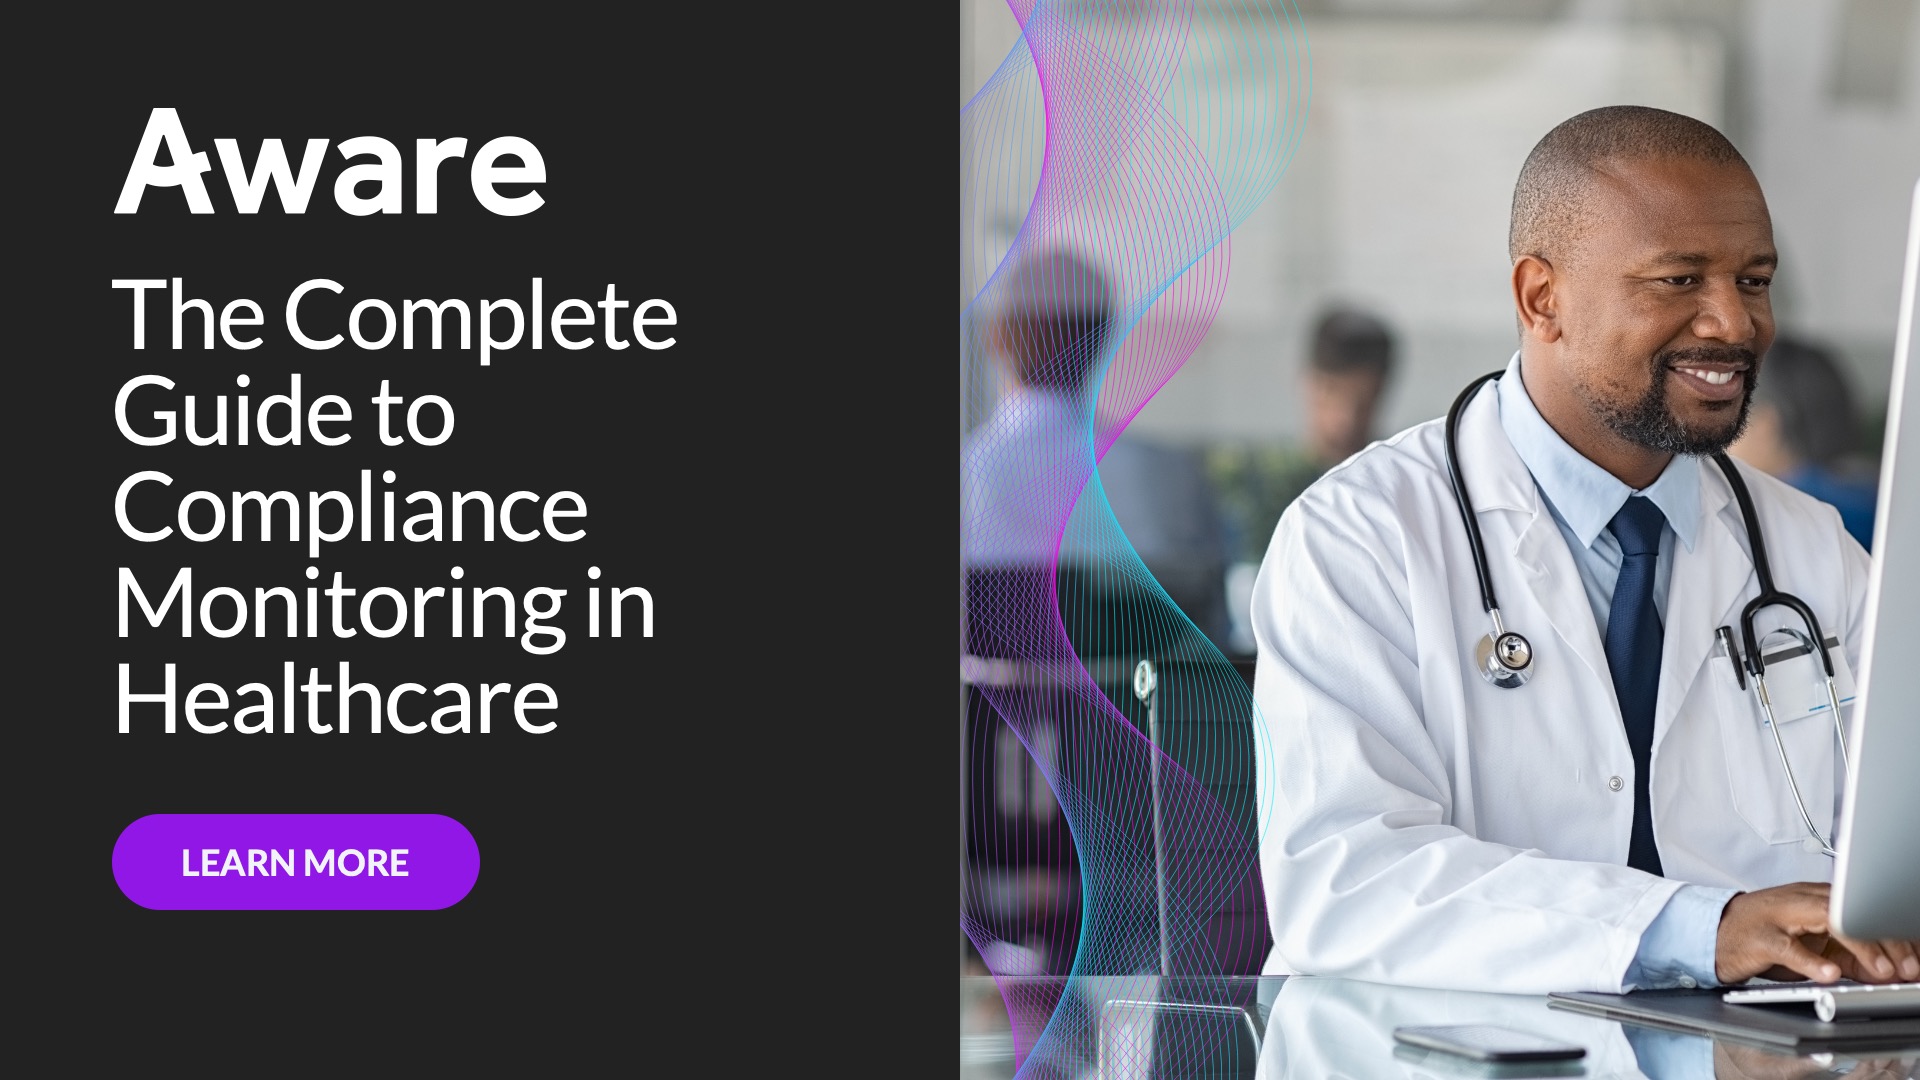 The Complete Guide to Compliance Monitoring in Healthcare